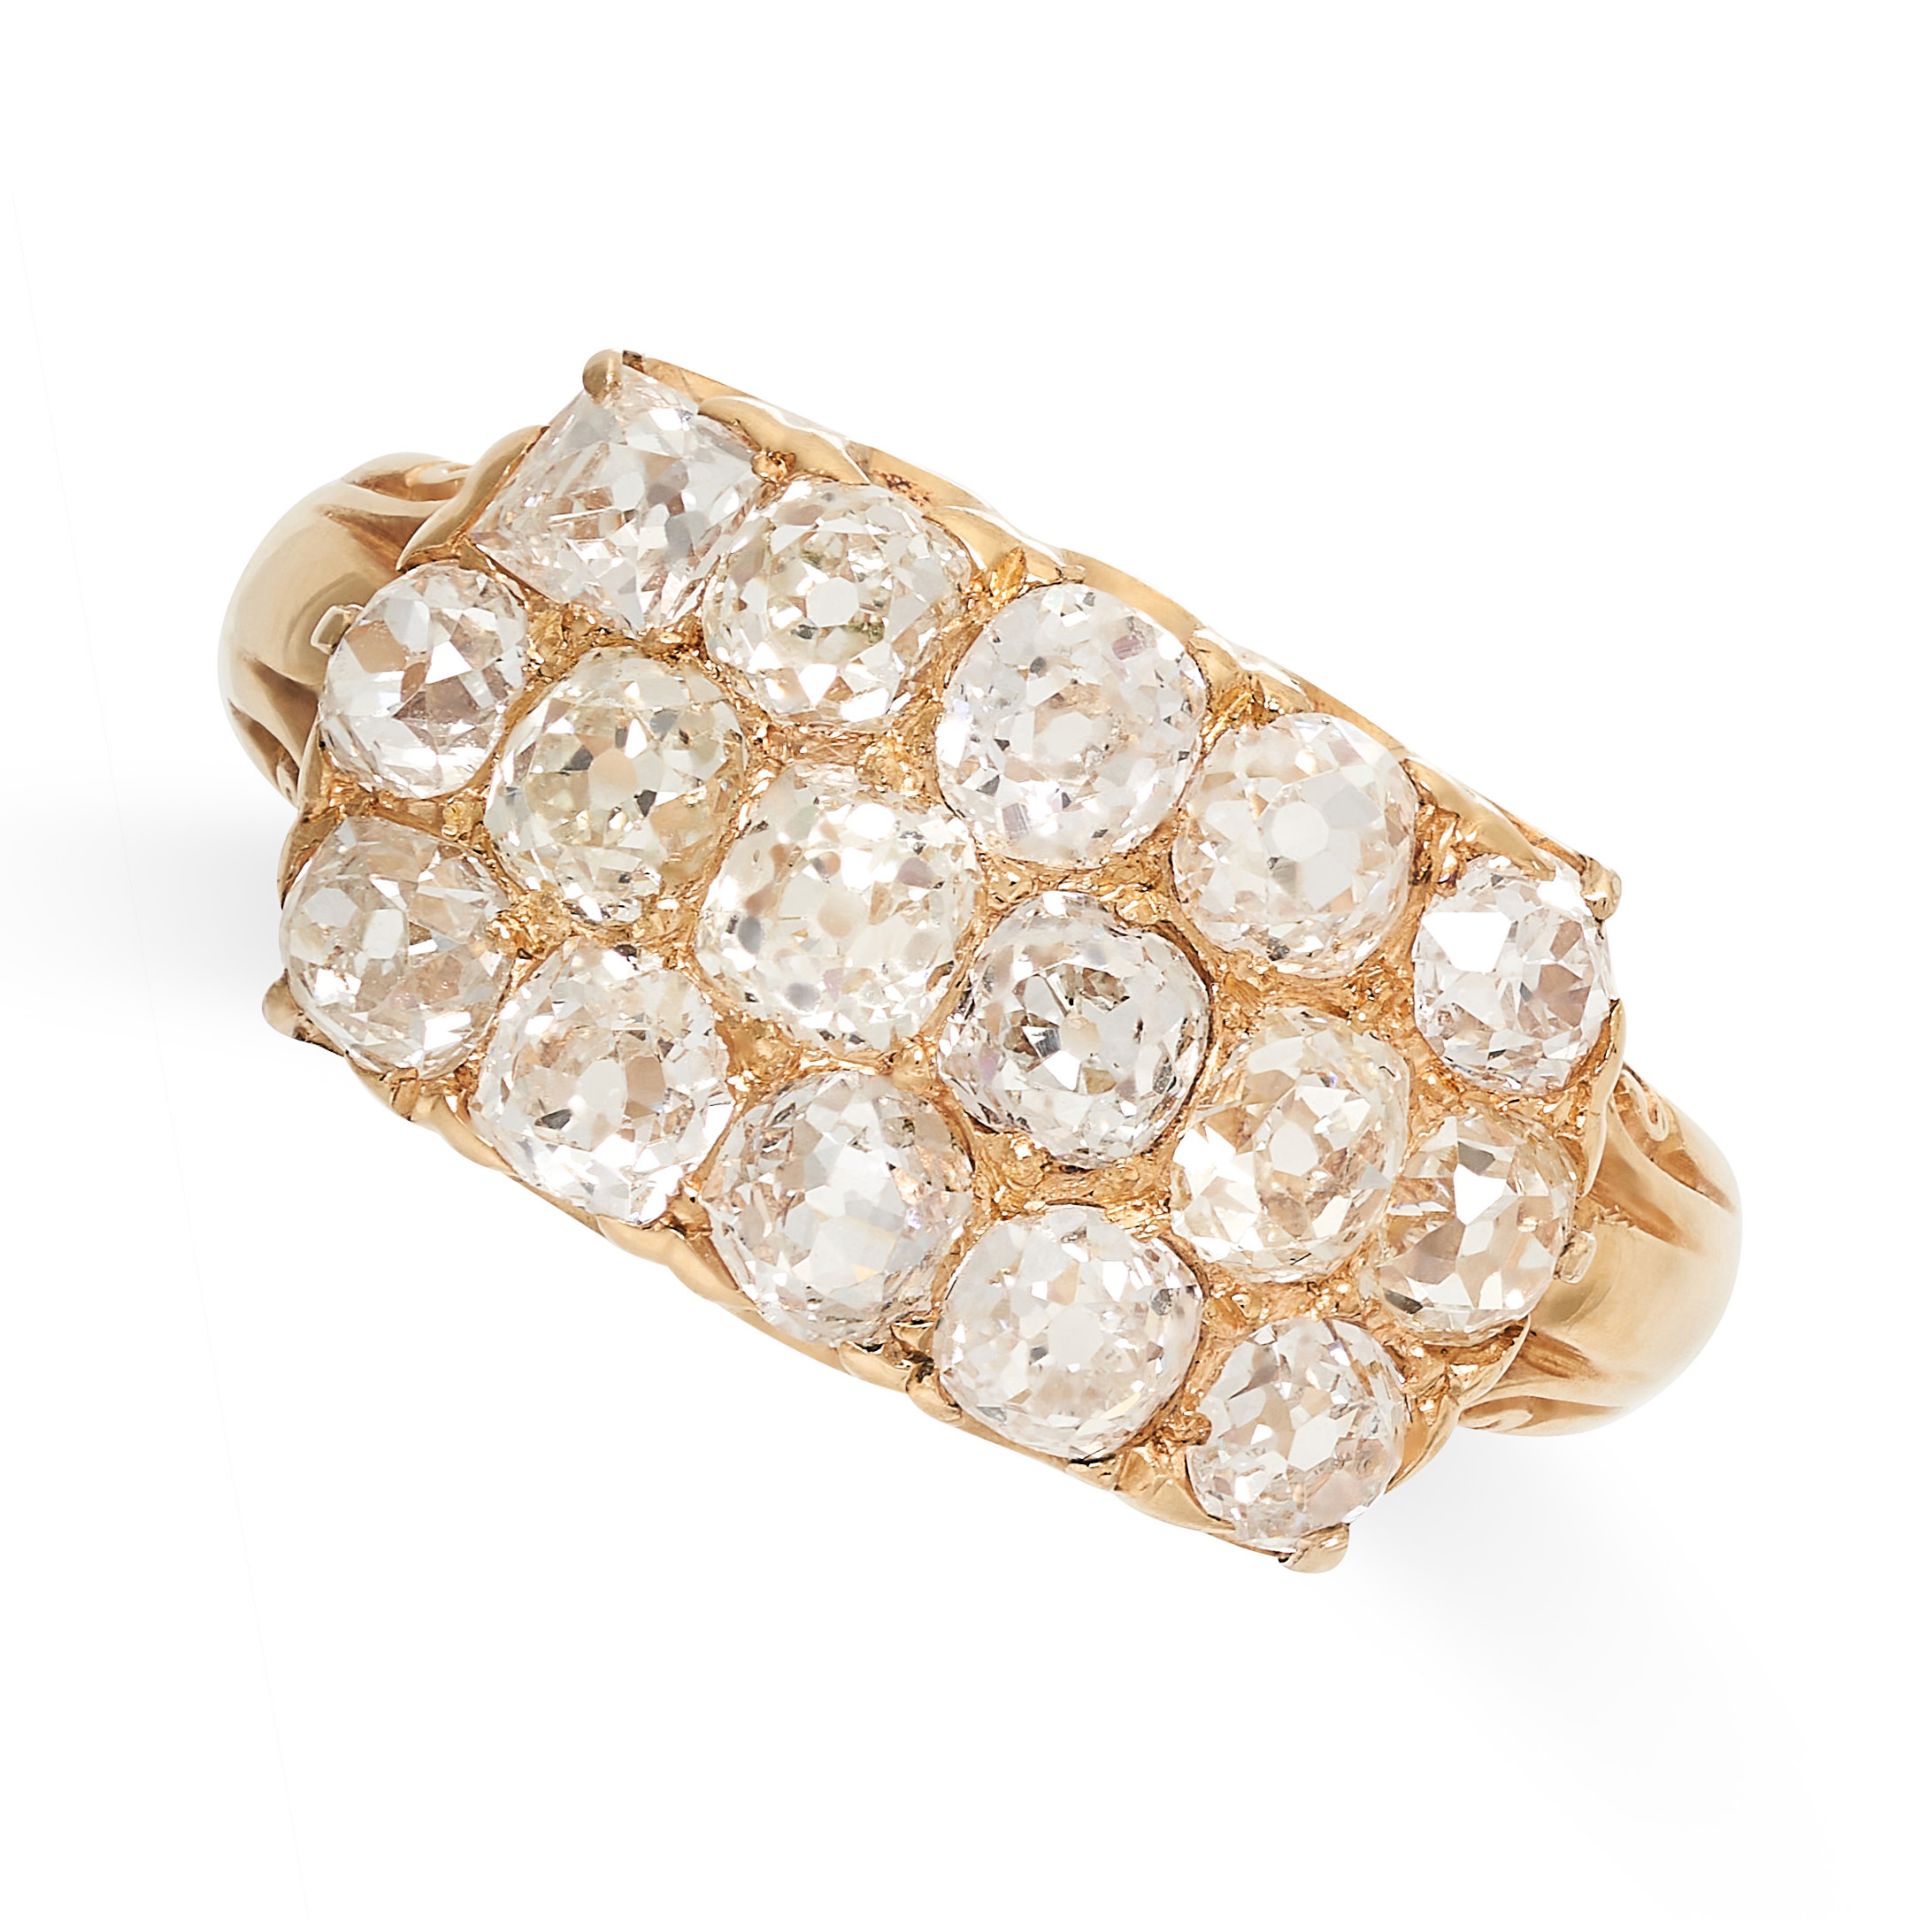 A DIAMOND DRESS RING in yellow gold, set with three rows of old cut diamonds, all totalling 2.2-2.